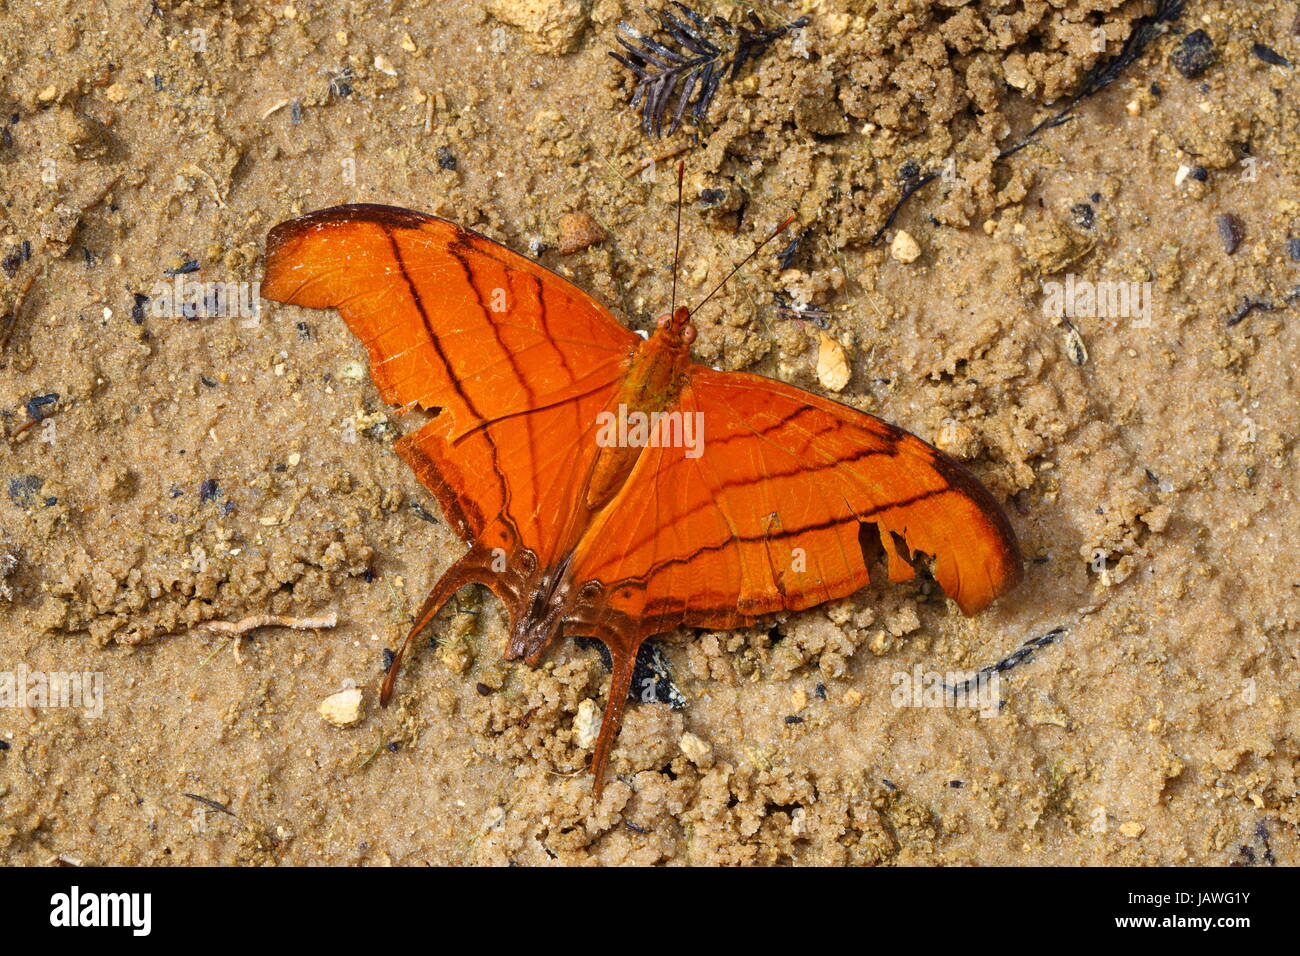 A ruddy daggerwing, Marpesia petreus, sipping nectar from a swamp flower in Florida's Everglades. Stock Photo